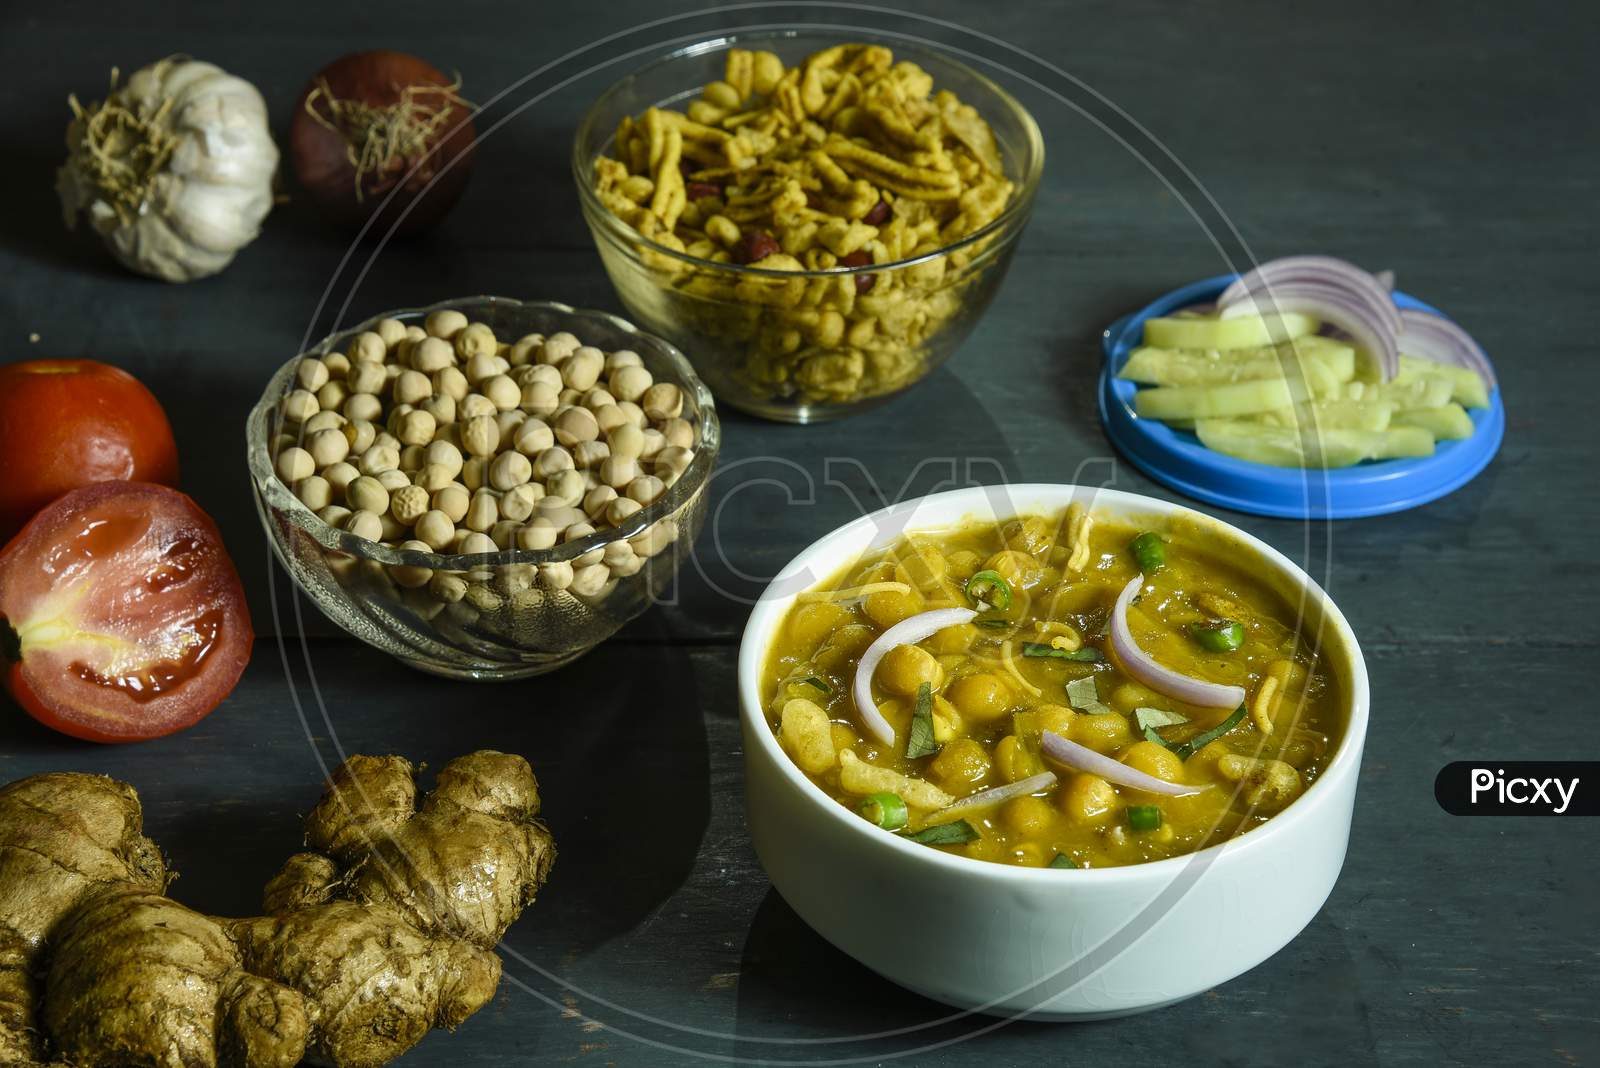 Ghugni, A preparation of Dried peas with Spices,chanachur,Tomatoes,Onions and Green Chilies. It is a famous street food of Eastern India.